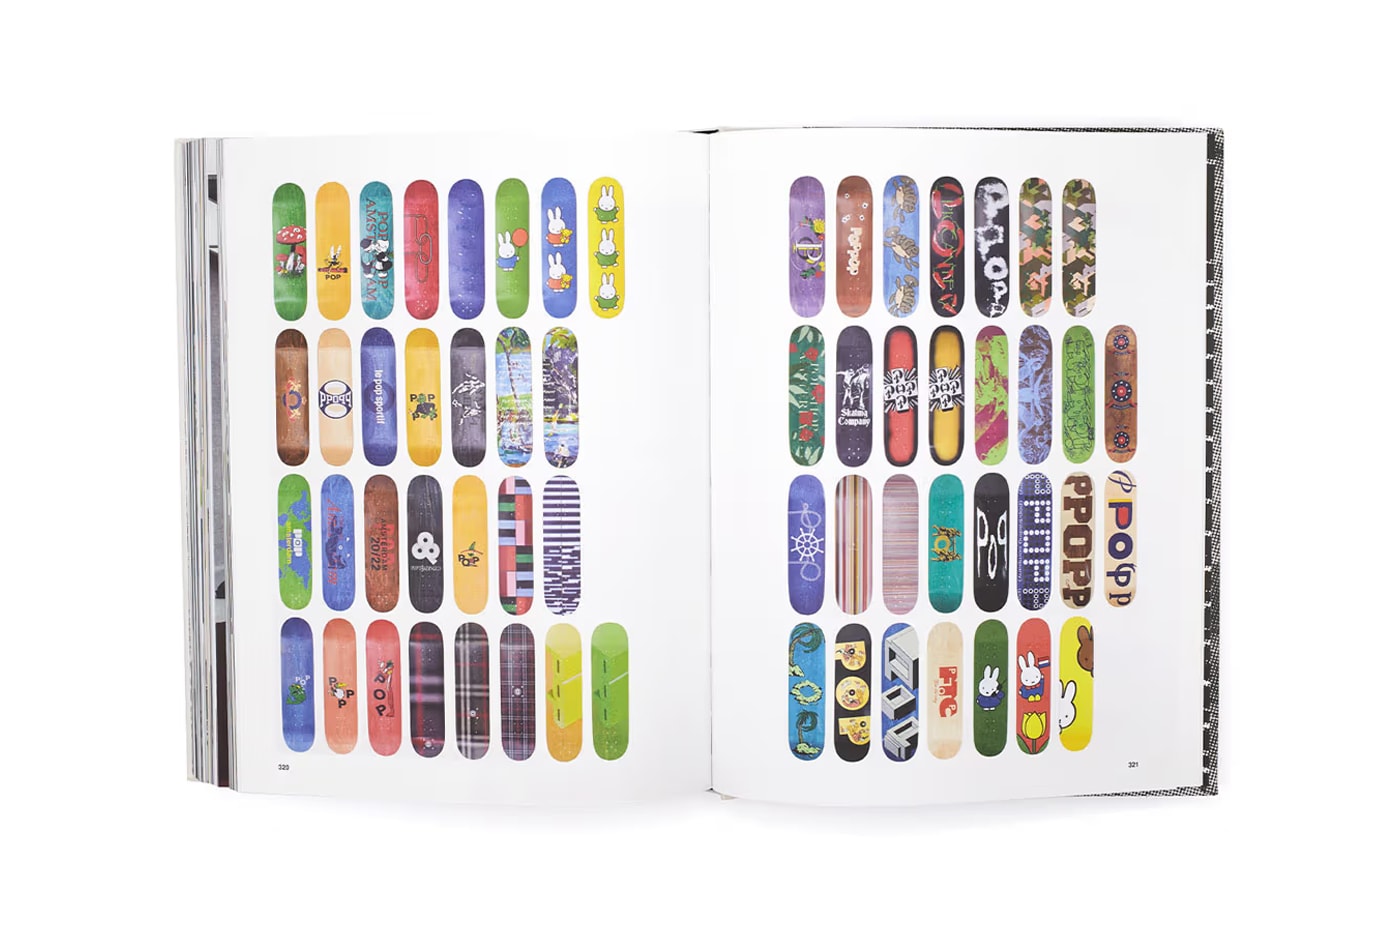 Pop Trading Company Compiles Its Connections in New Book skate amsterdam skateboard streetwear fashion price link drop store form bookstore pages copy deck clothes hoodie jacket release netherlands decade 